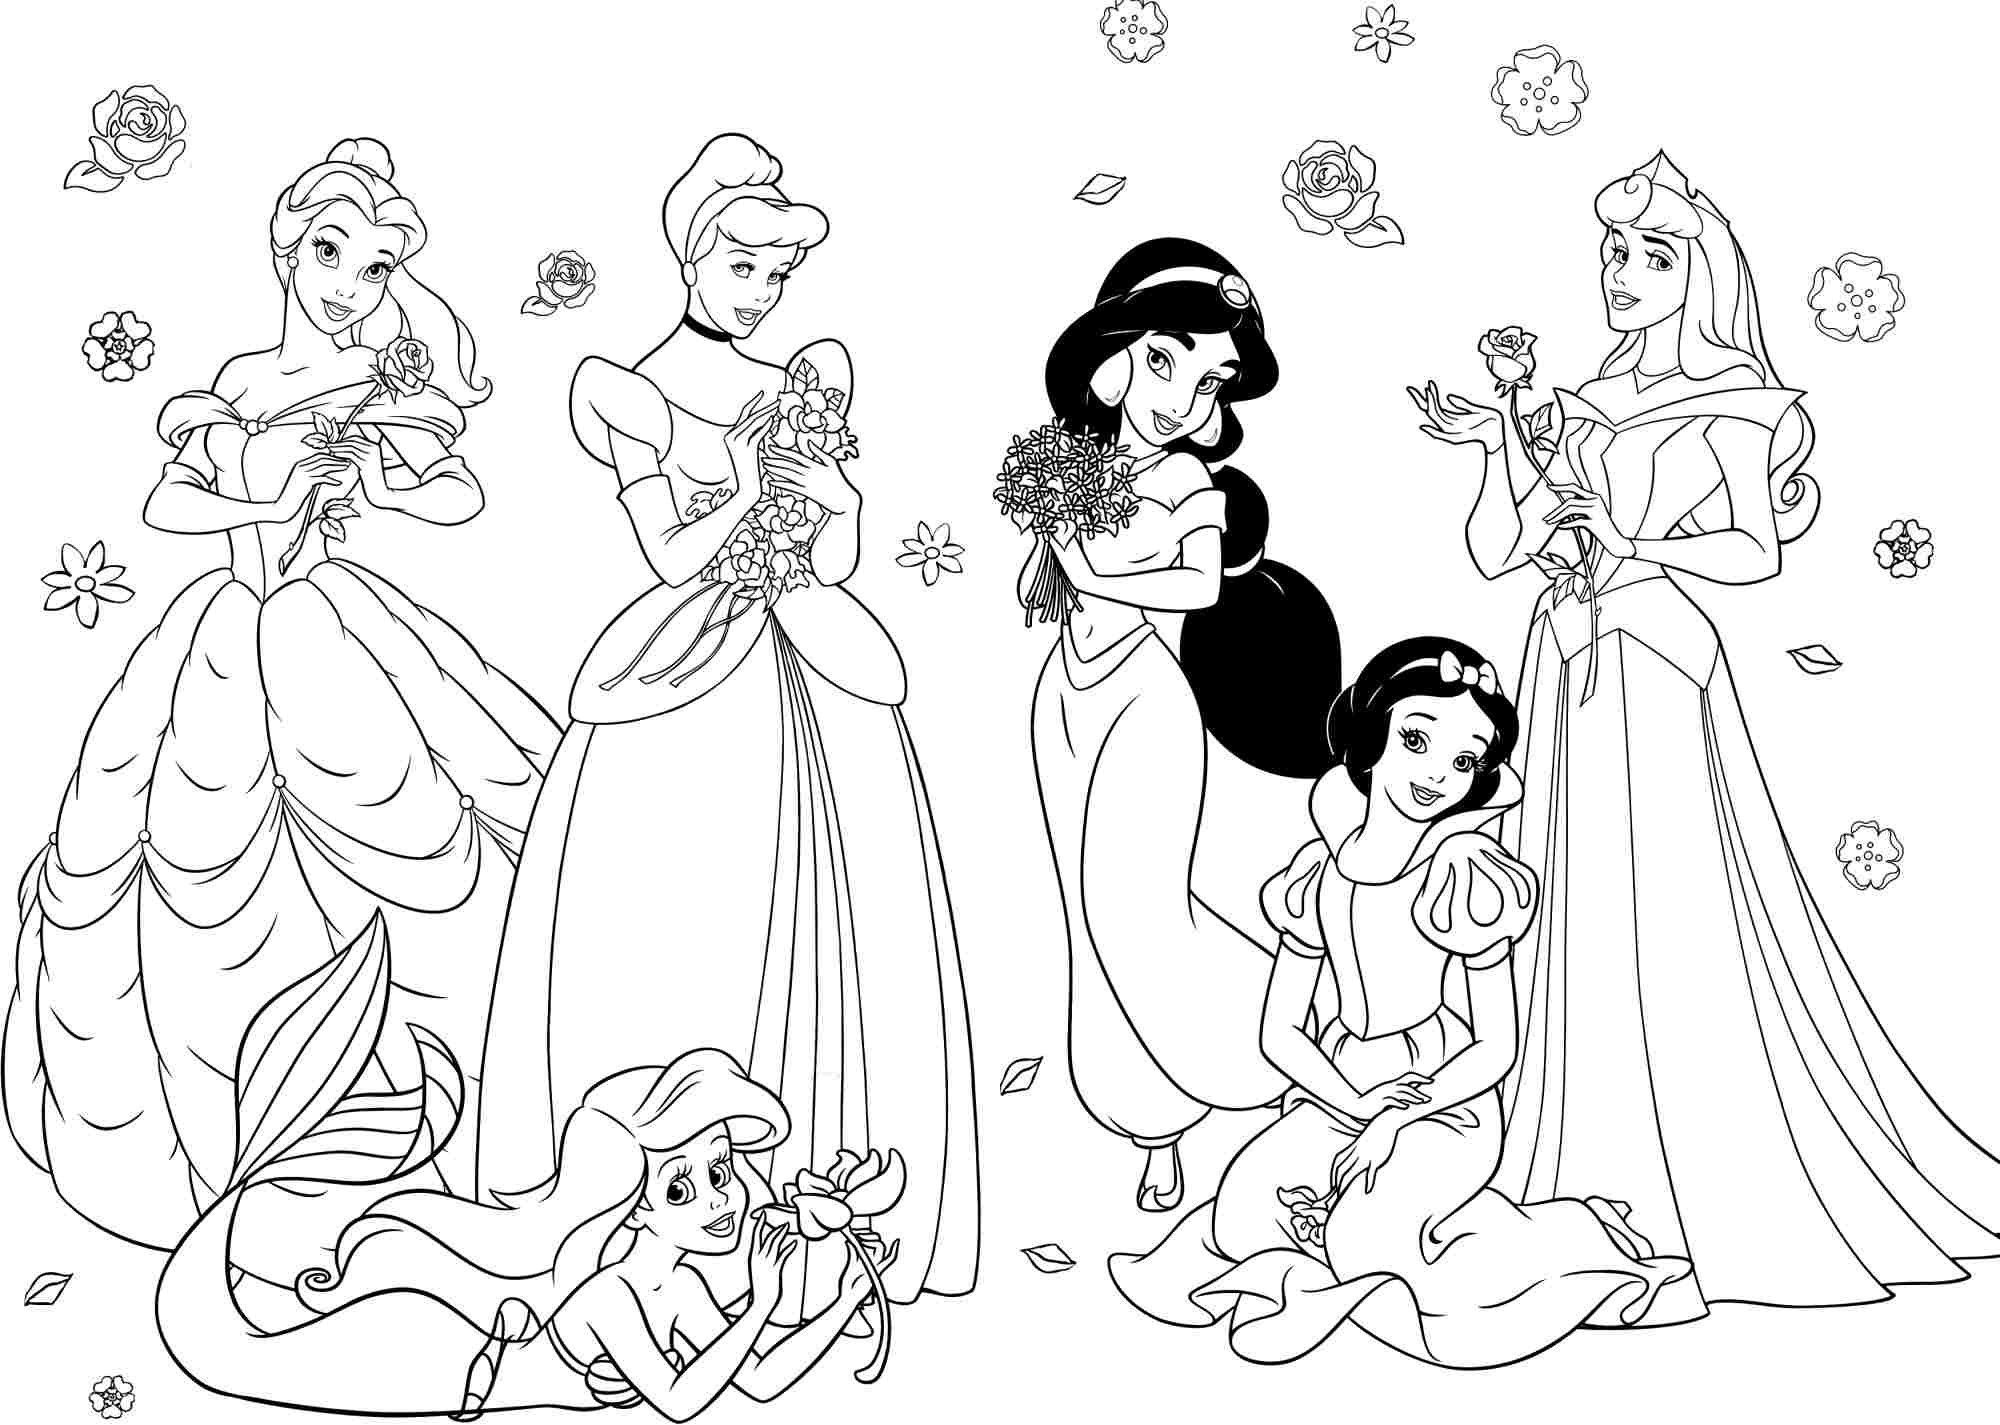 Coloring Pages For Girls Princess
 princess coloring pages for girls Free